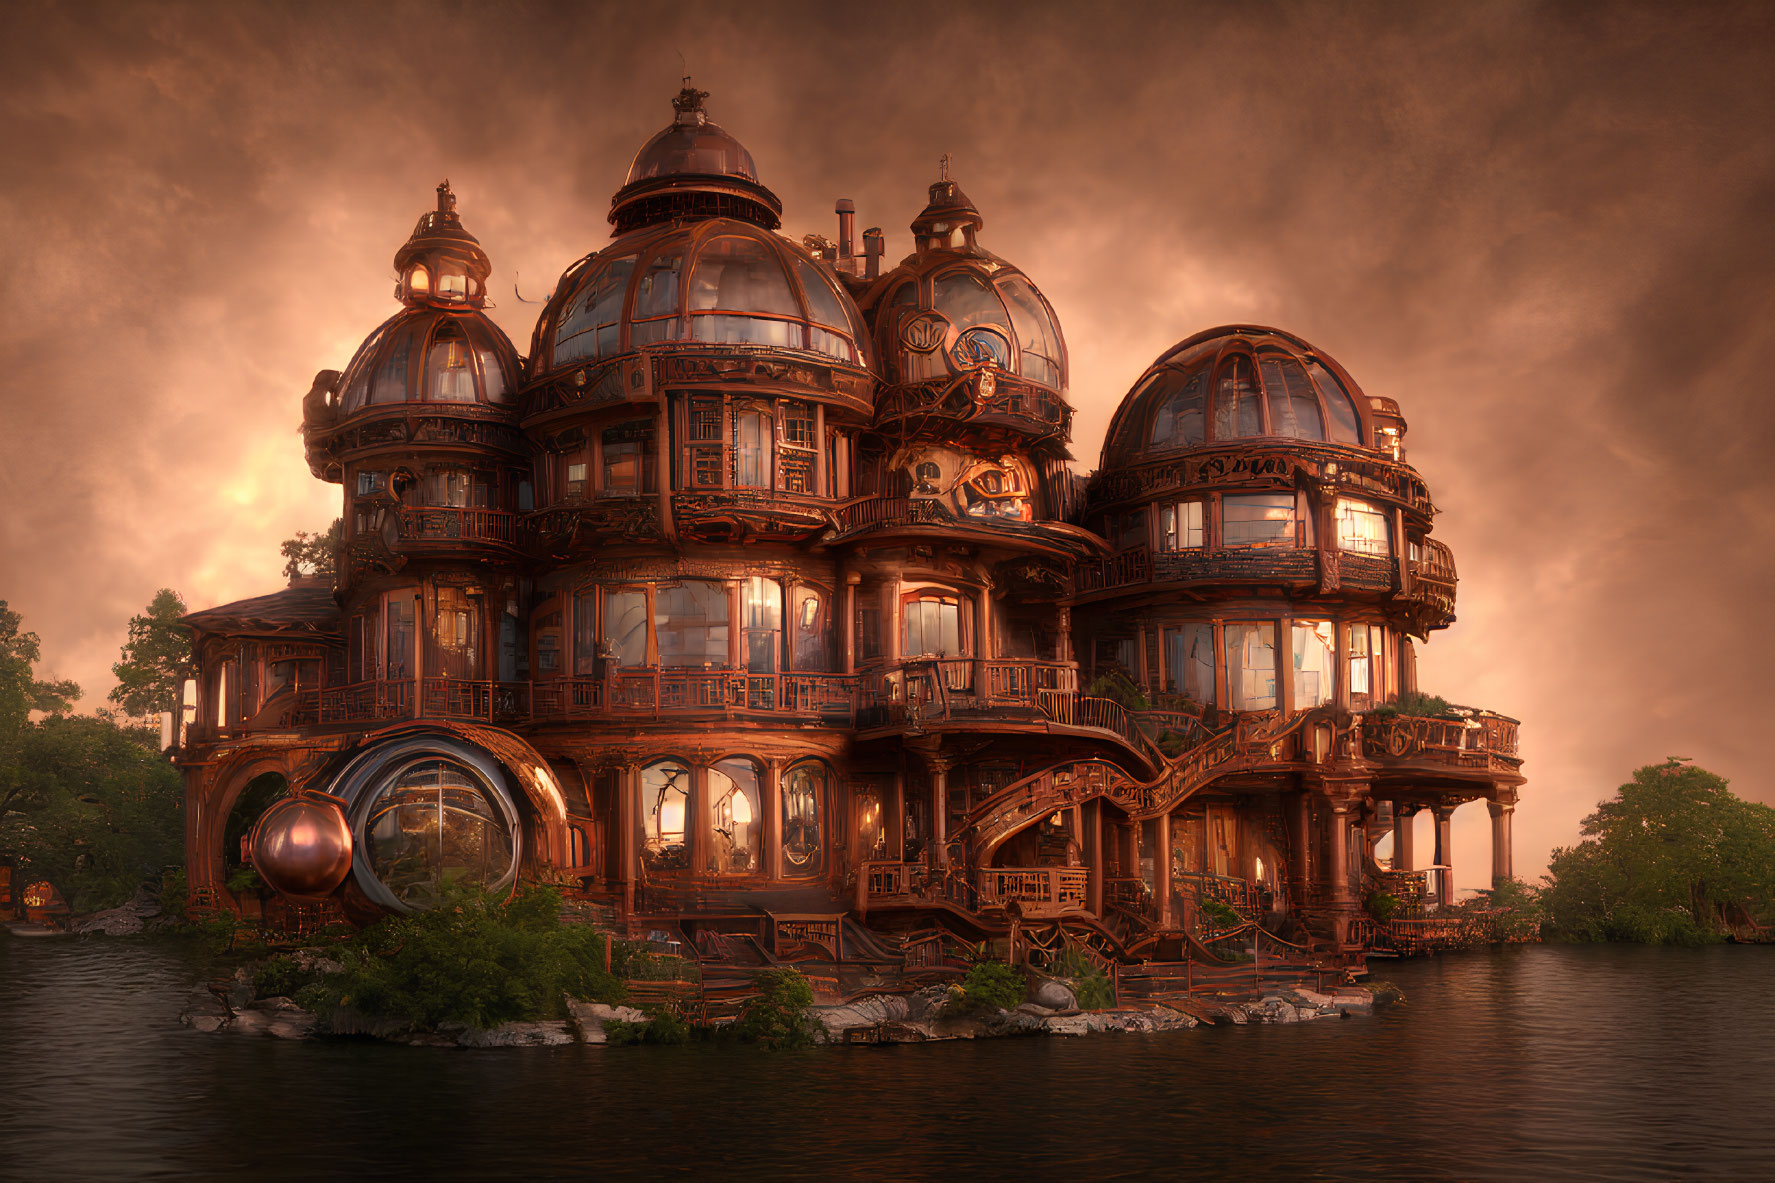 Steampunk-inspired mansion with ornate domes in dramatic sunset setting